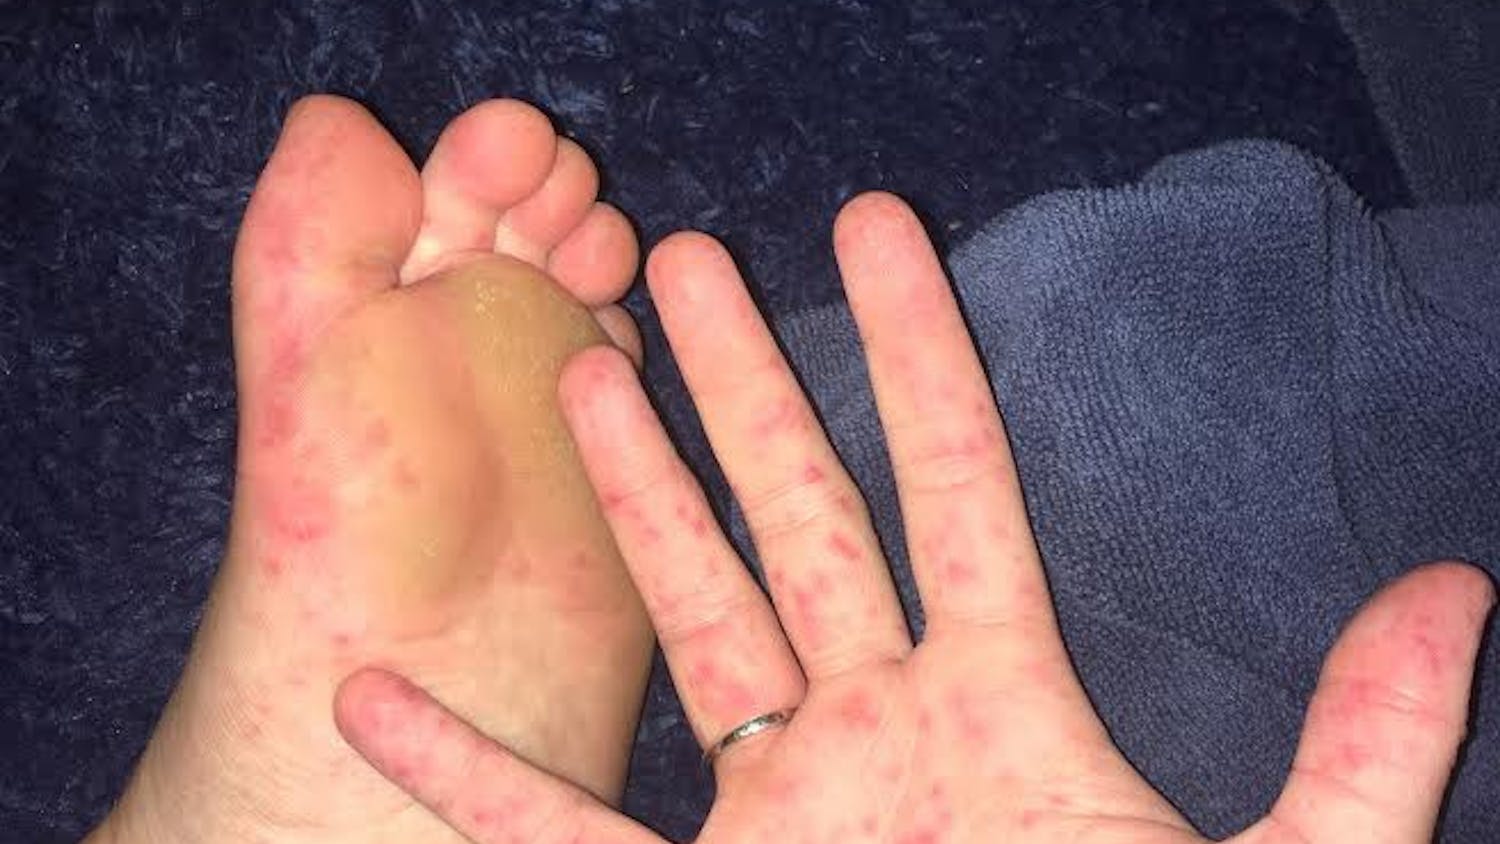 Hand, foot and mouth disease has spread on campus.